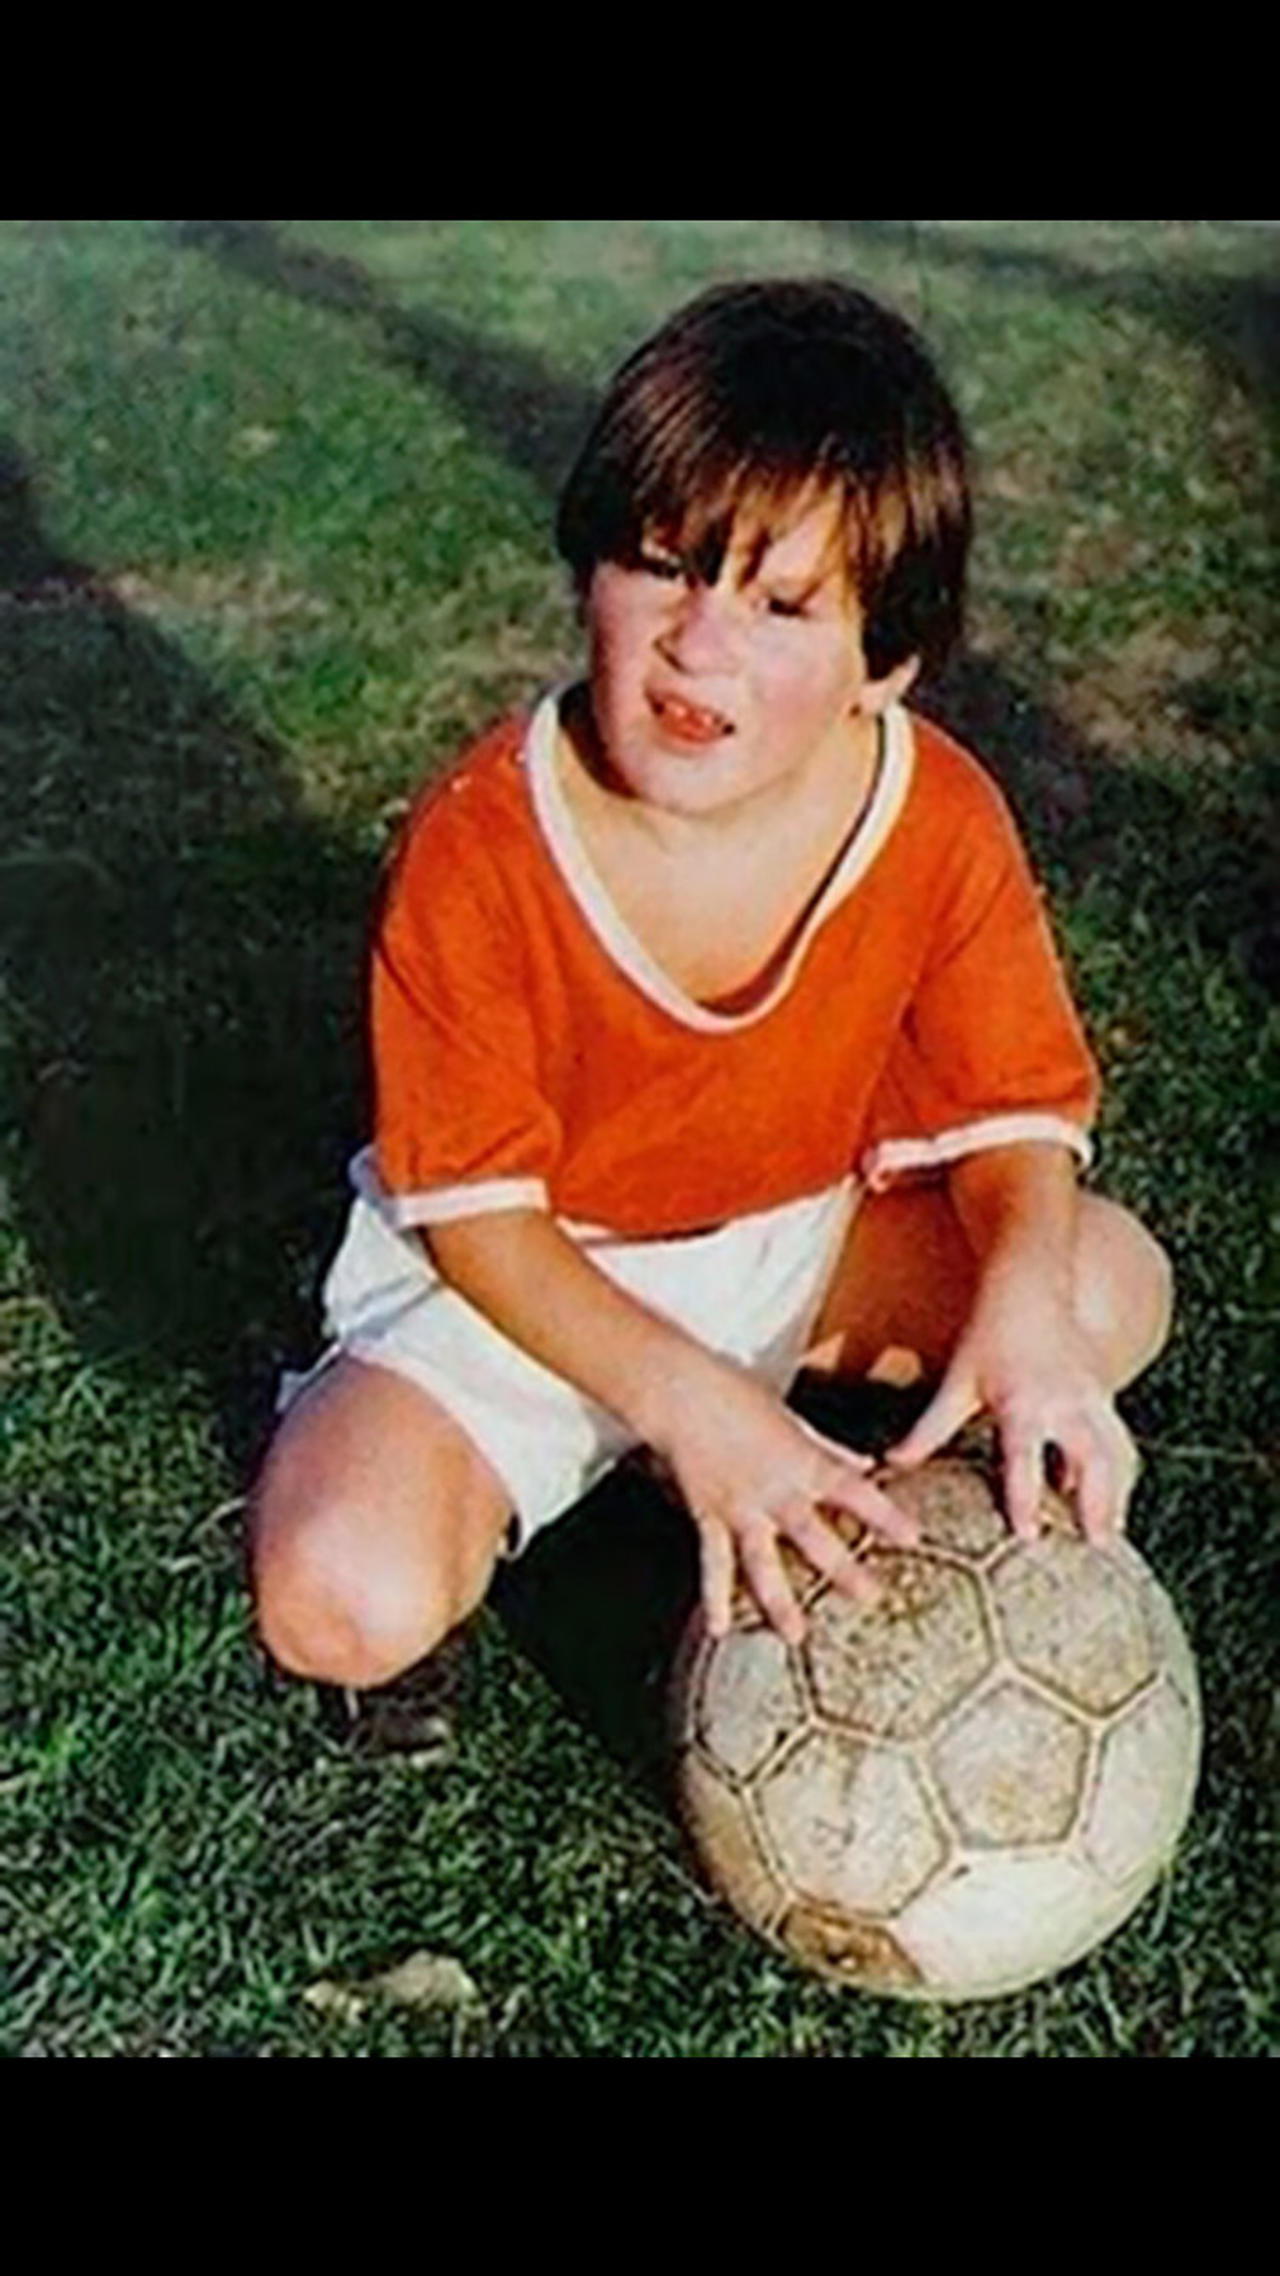 Messi as a child